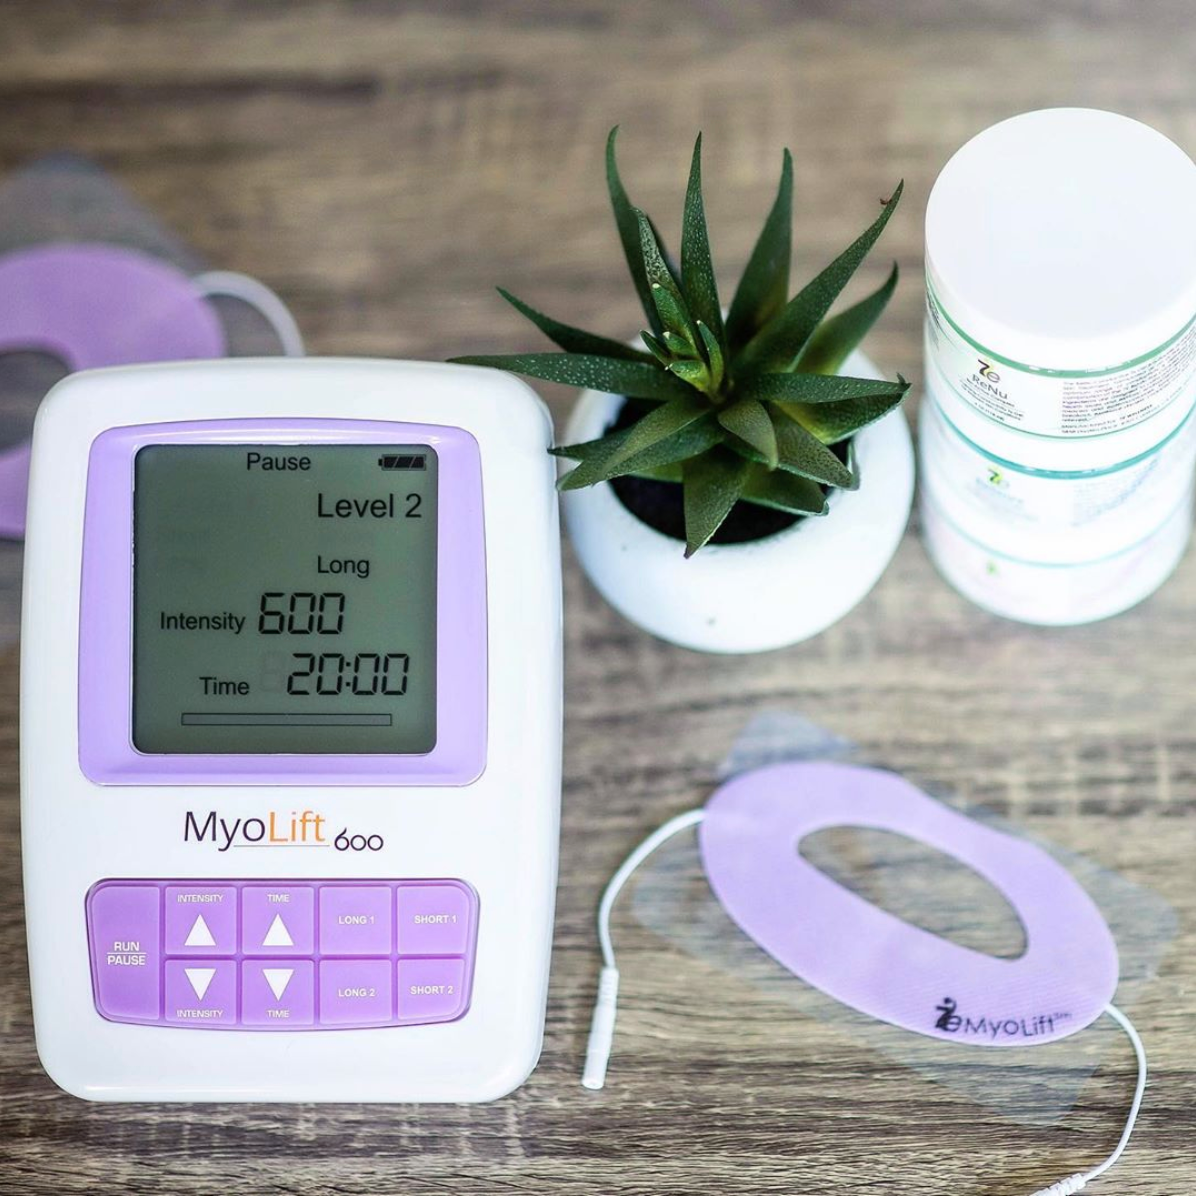 MyoLift QT - True Microcurrent Device

**Use code: Pretty for Your Discount!**